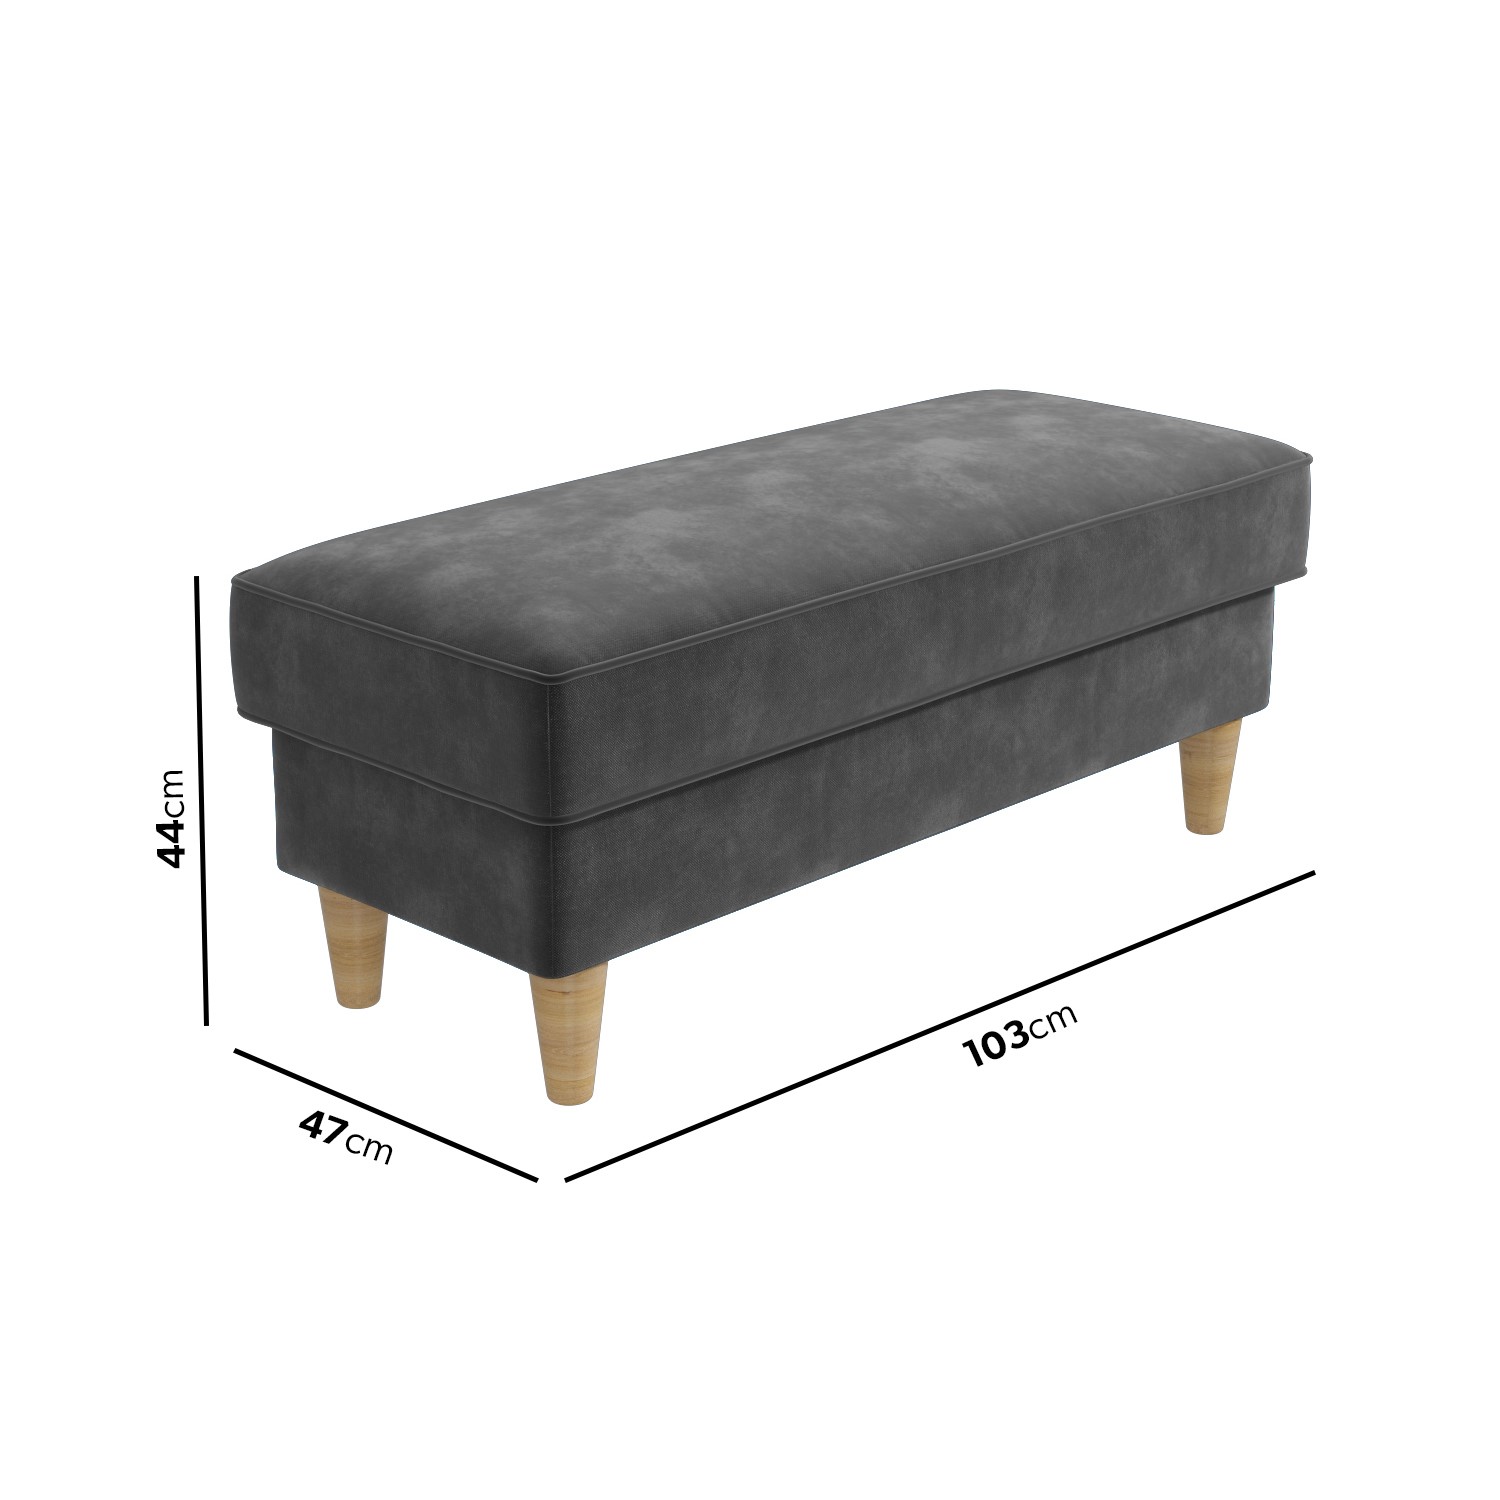 Read more about Large grey velvet footstool idris